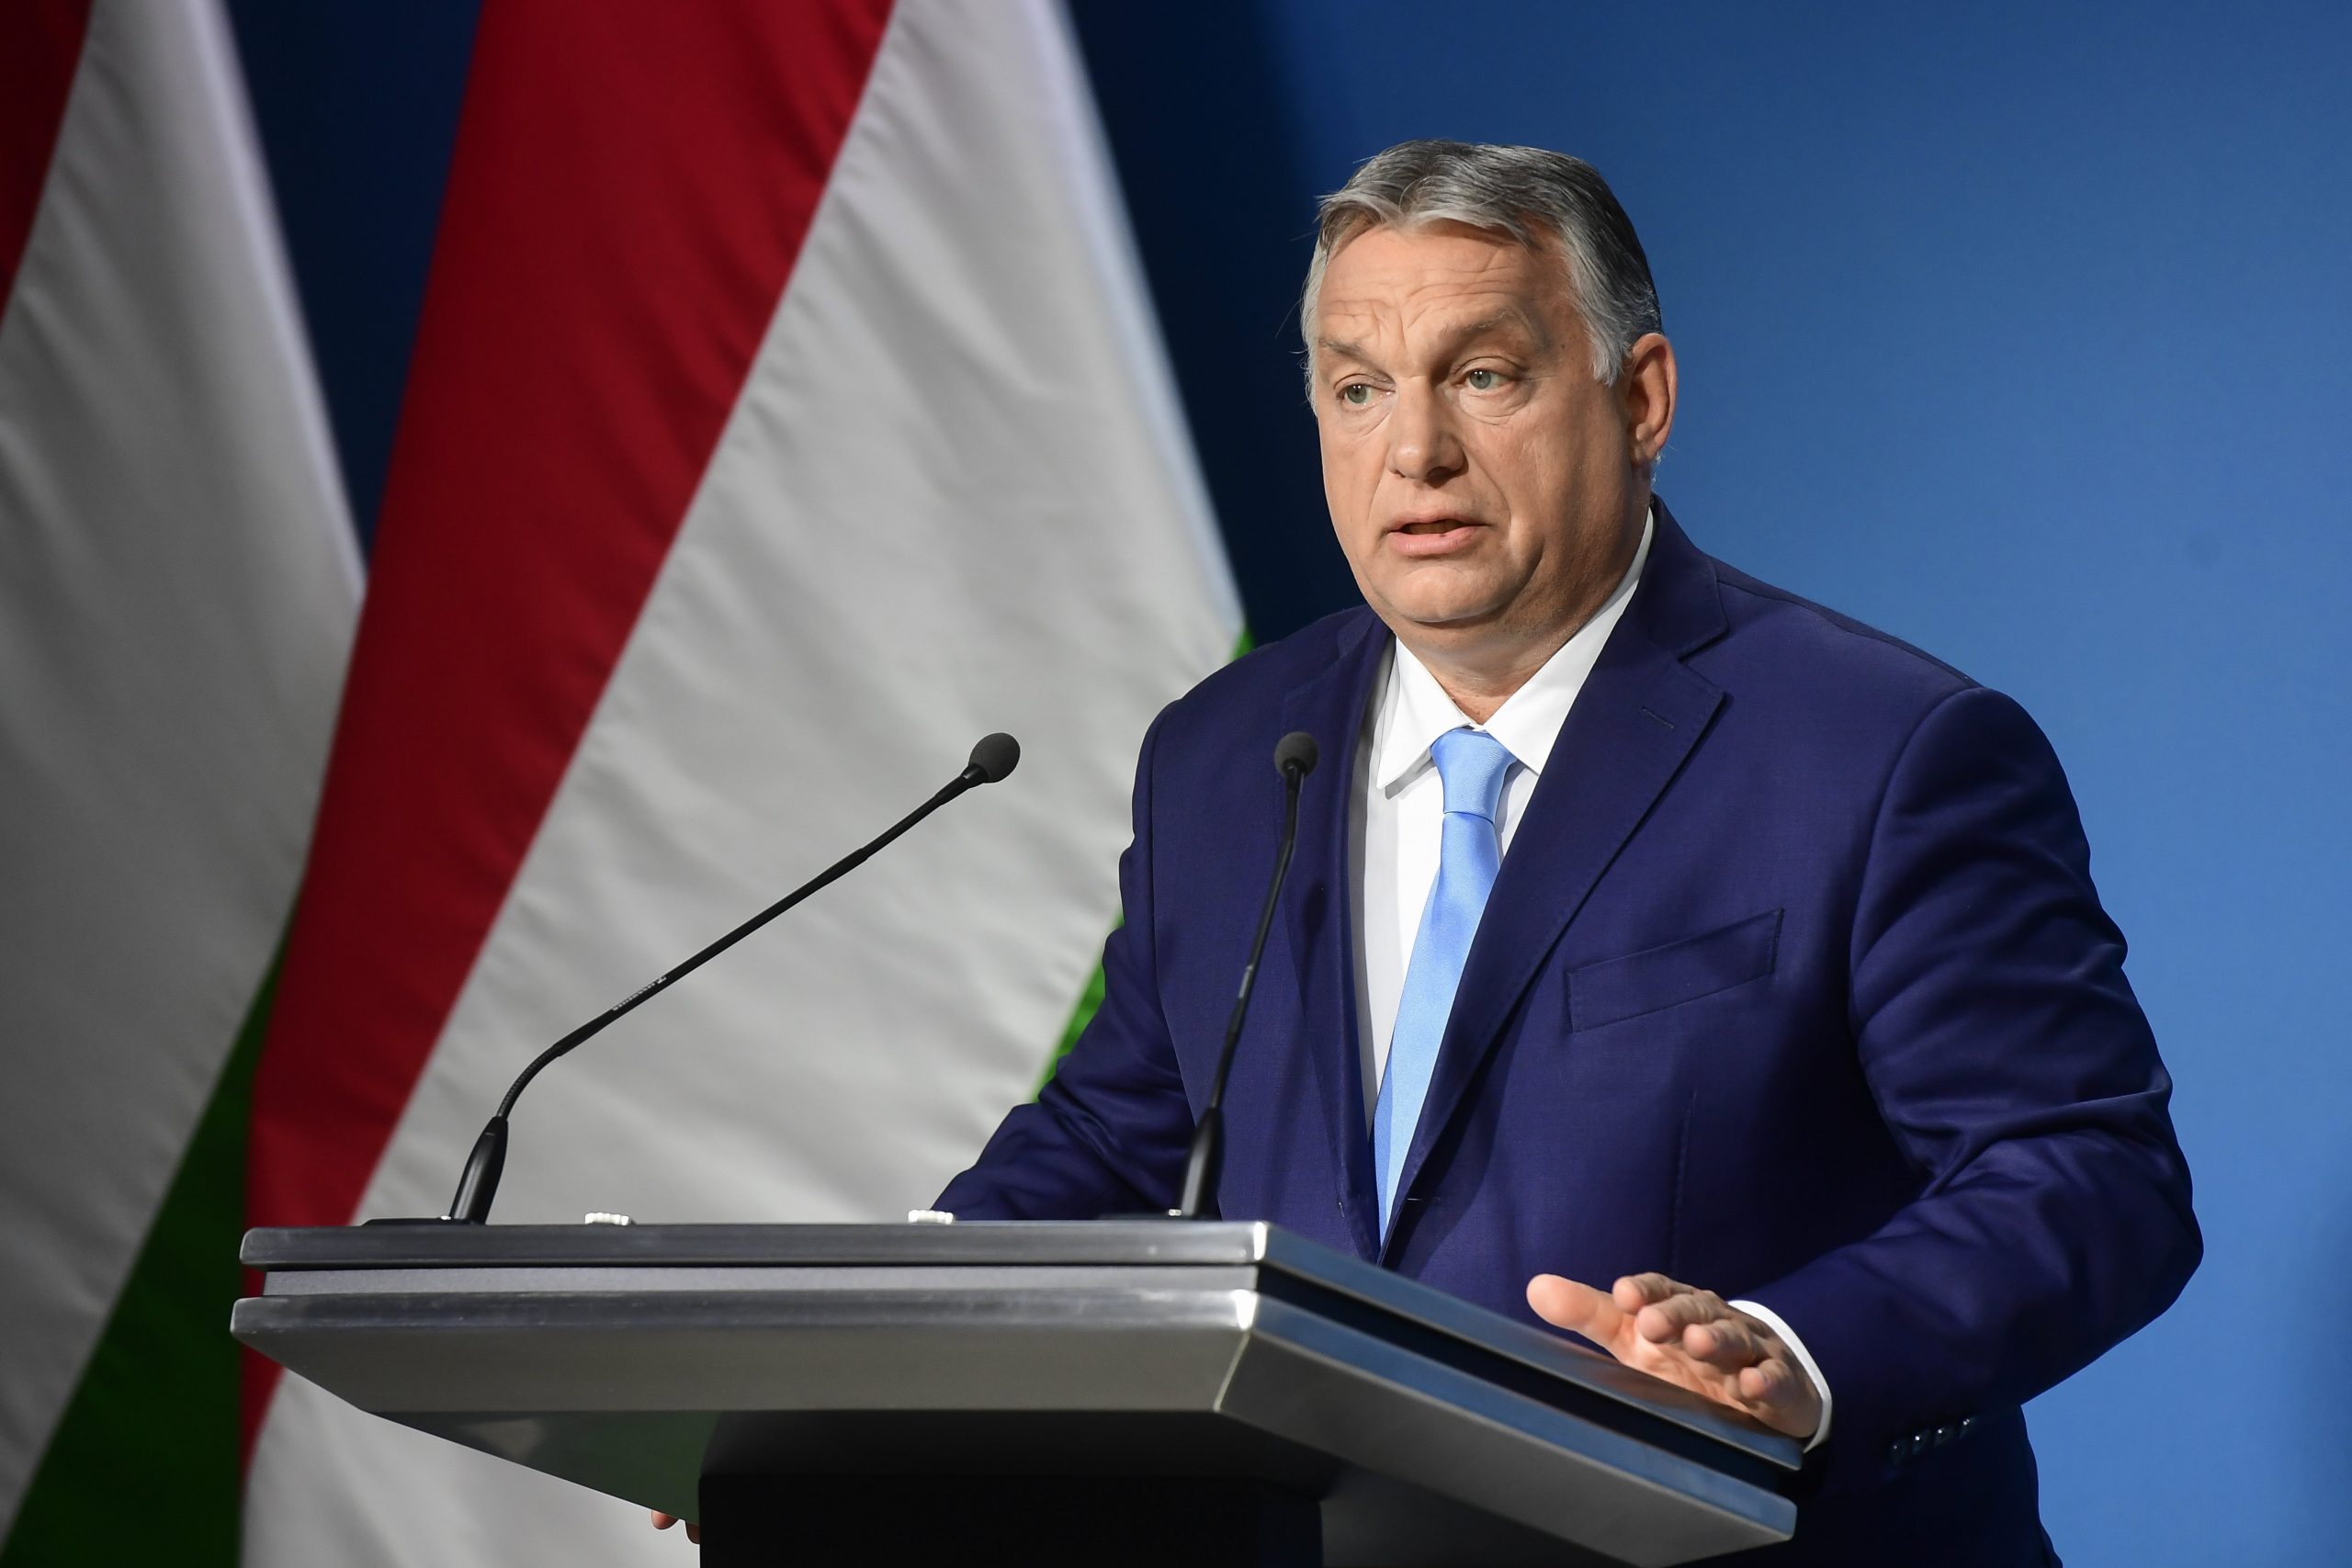 Central Europe 'Blessing for the EU' - PM Orbán Responds to Fierce Criticism from British Historian, Timothy Garton Ash